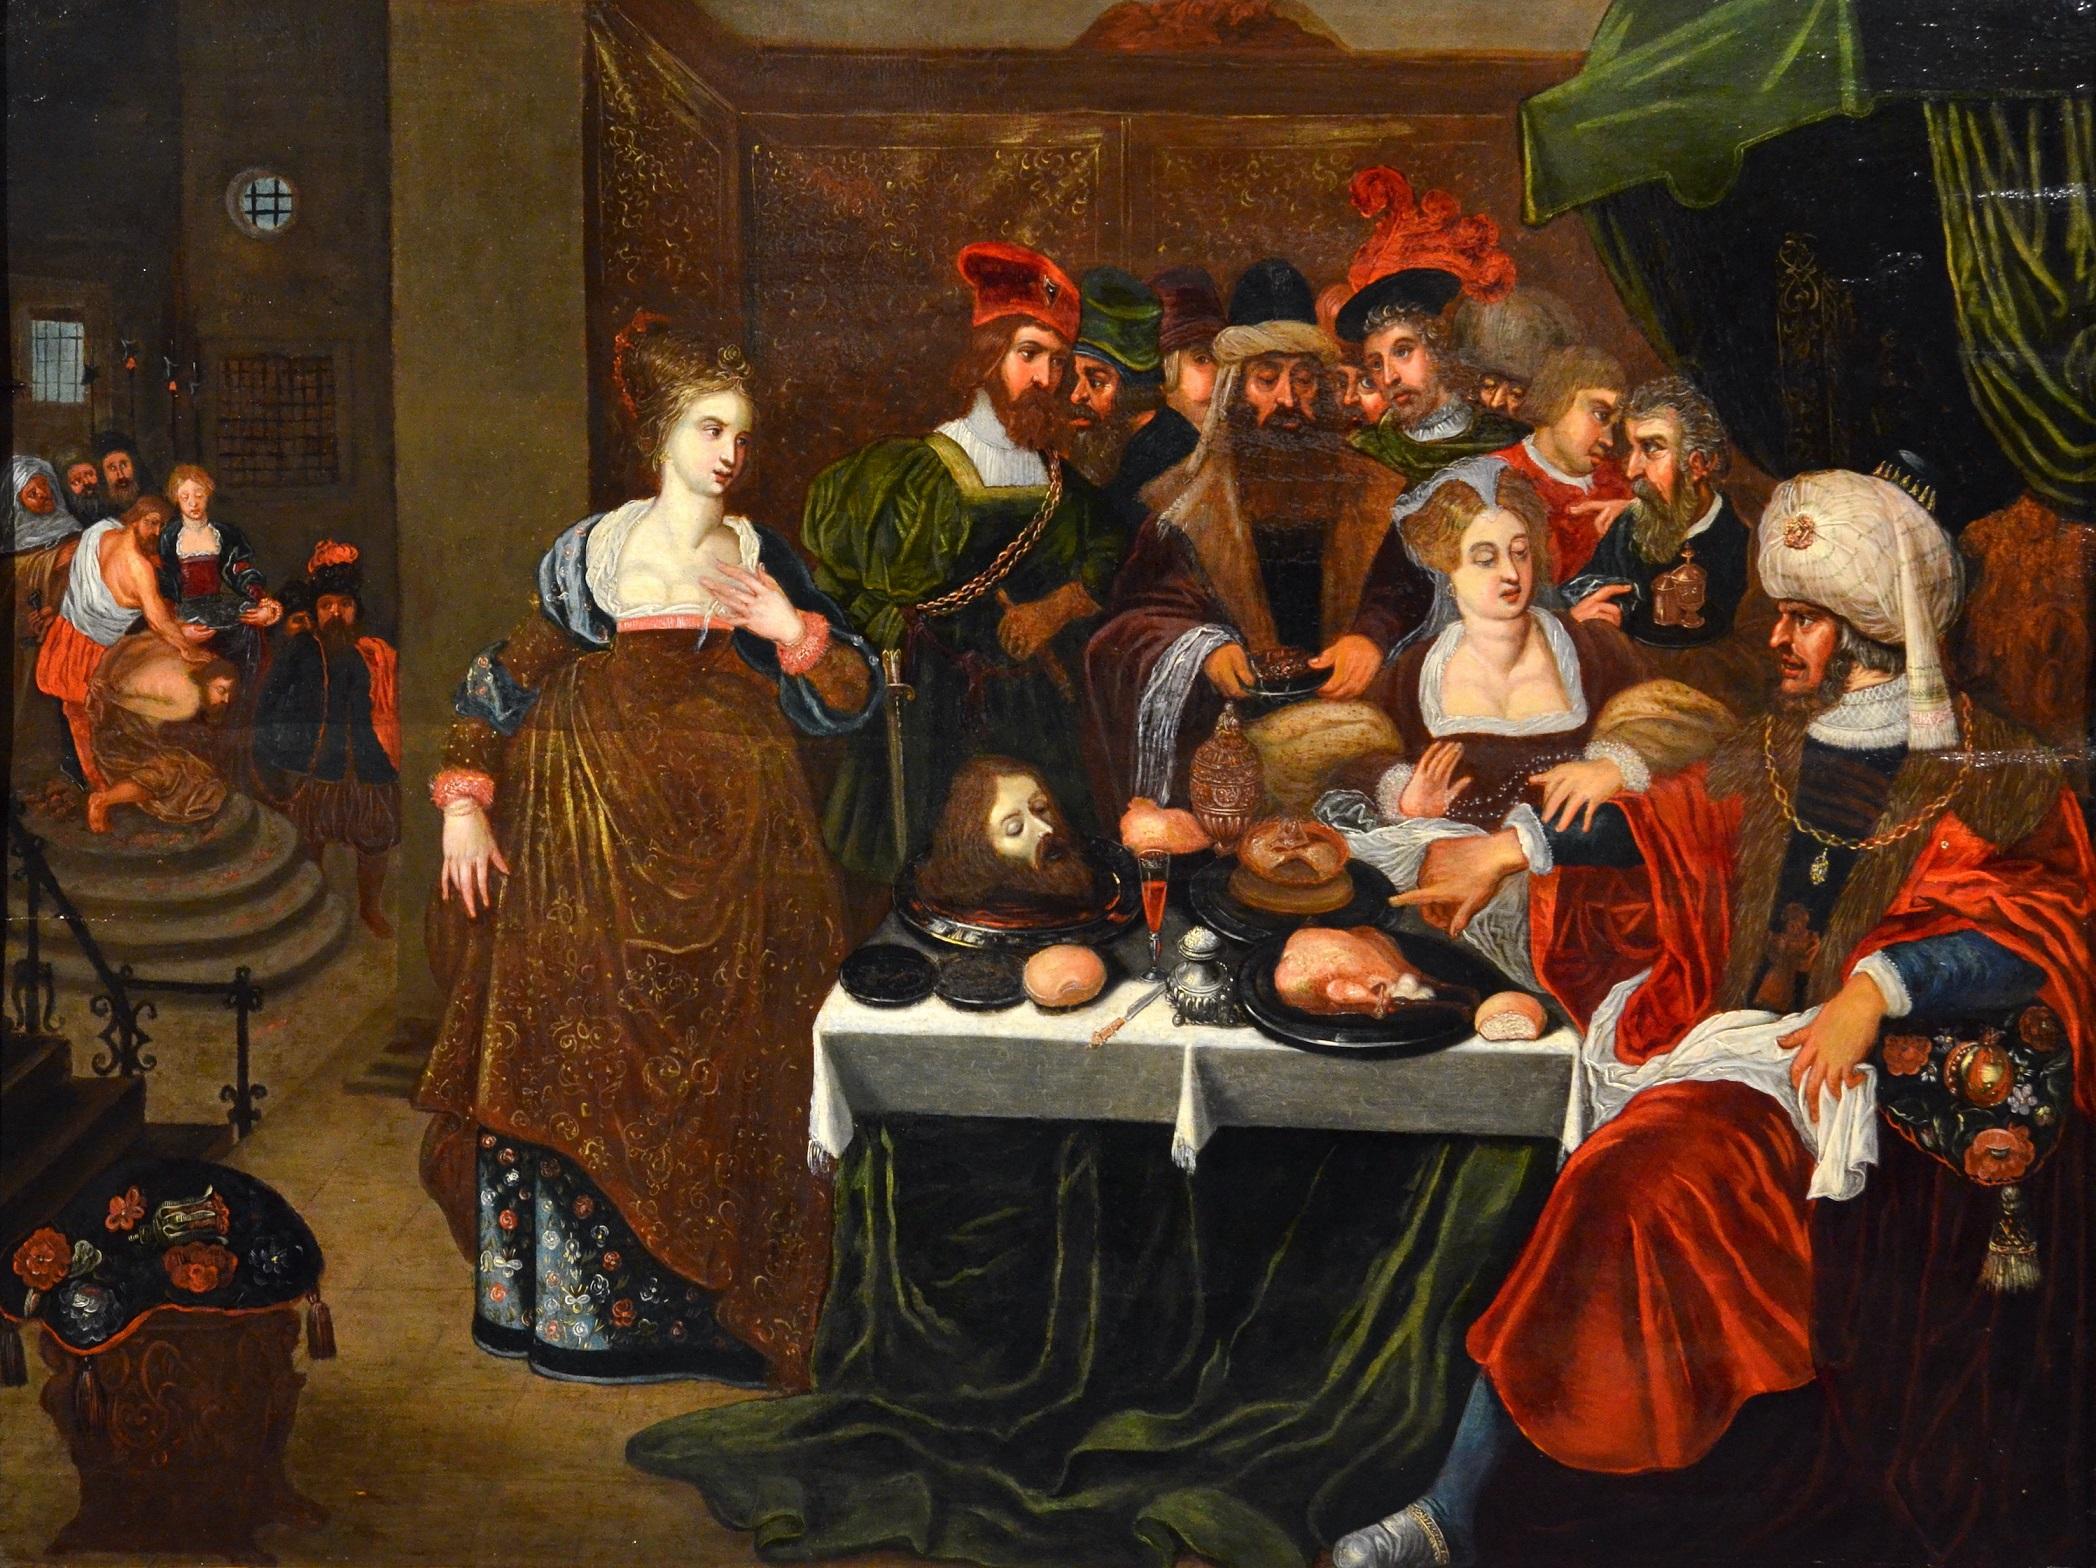 Banquet Attrib to Van Den Hoecke Religious Oil on Table Old Master 17th Century